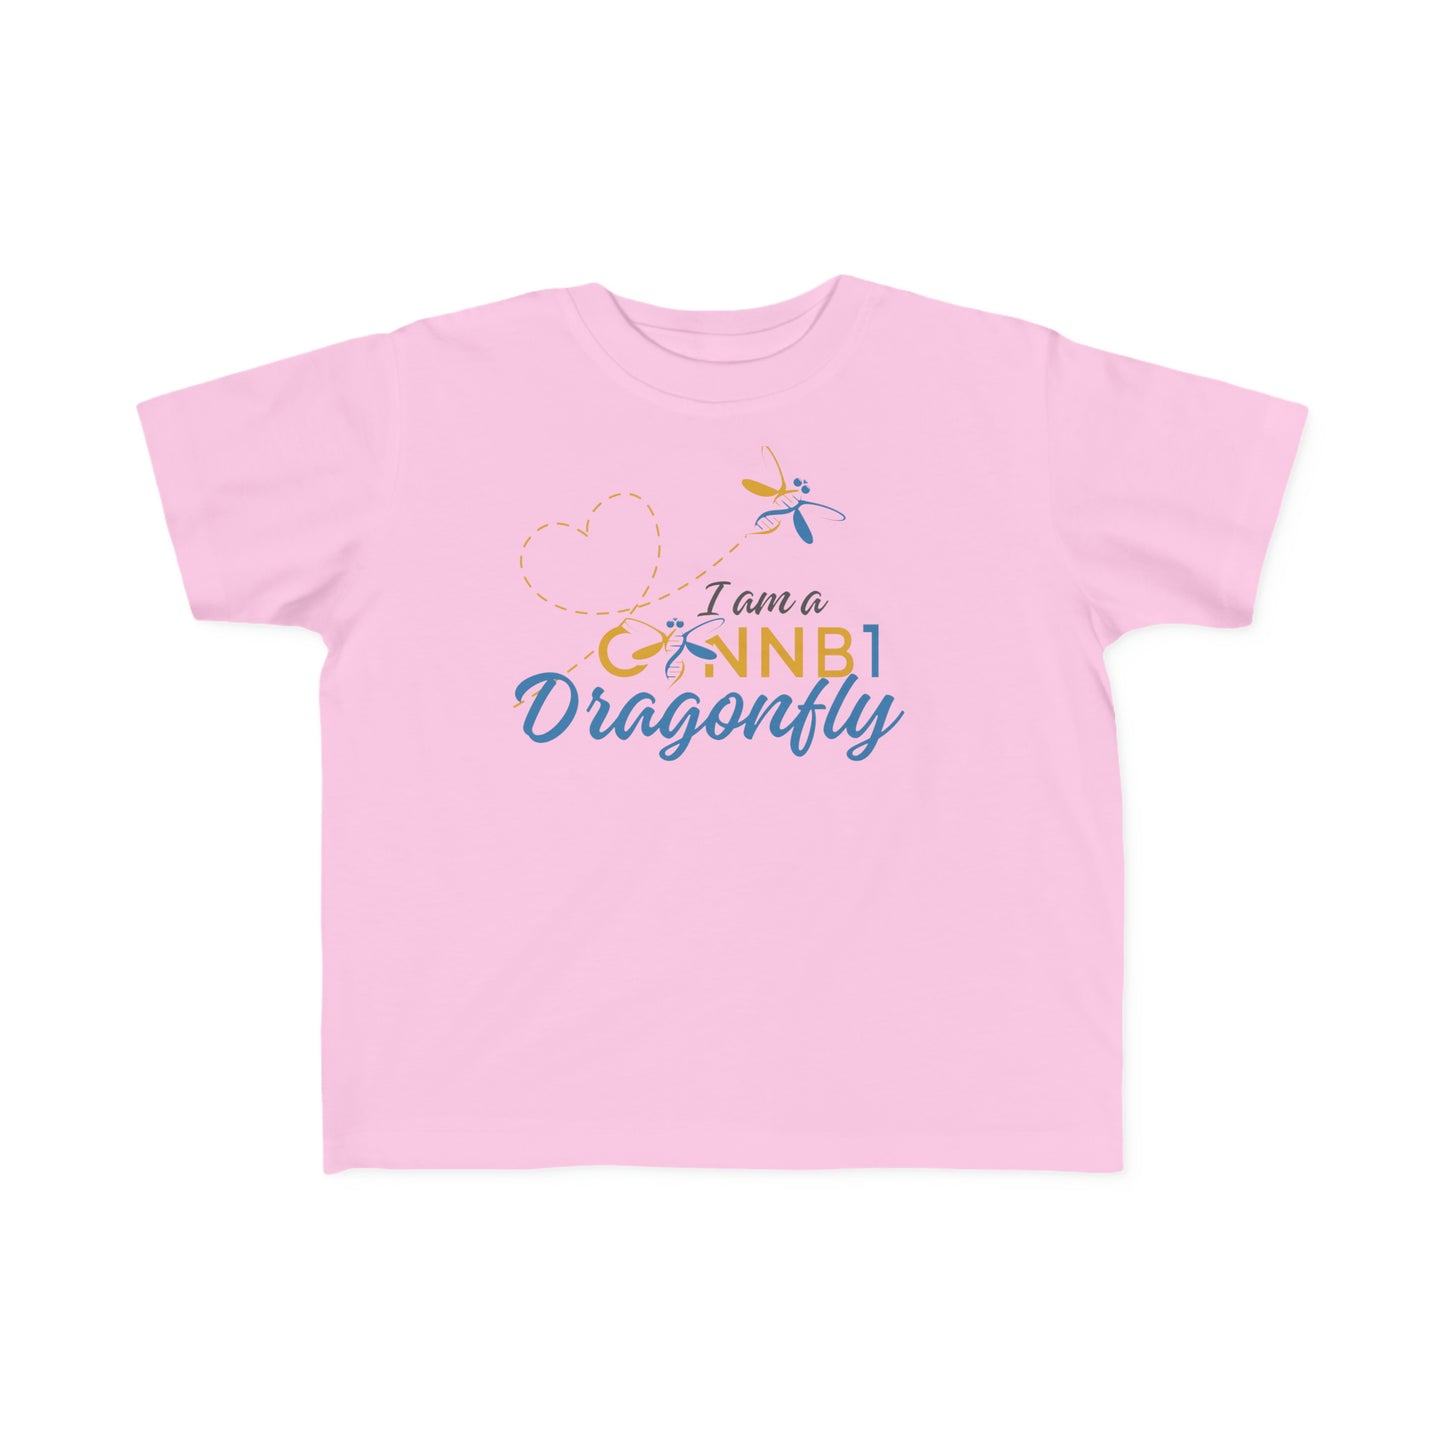 Proud Dragonfly: Me! Toddler's Fine Jersey Tee